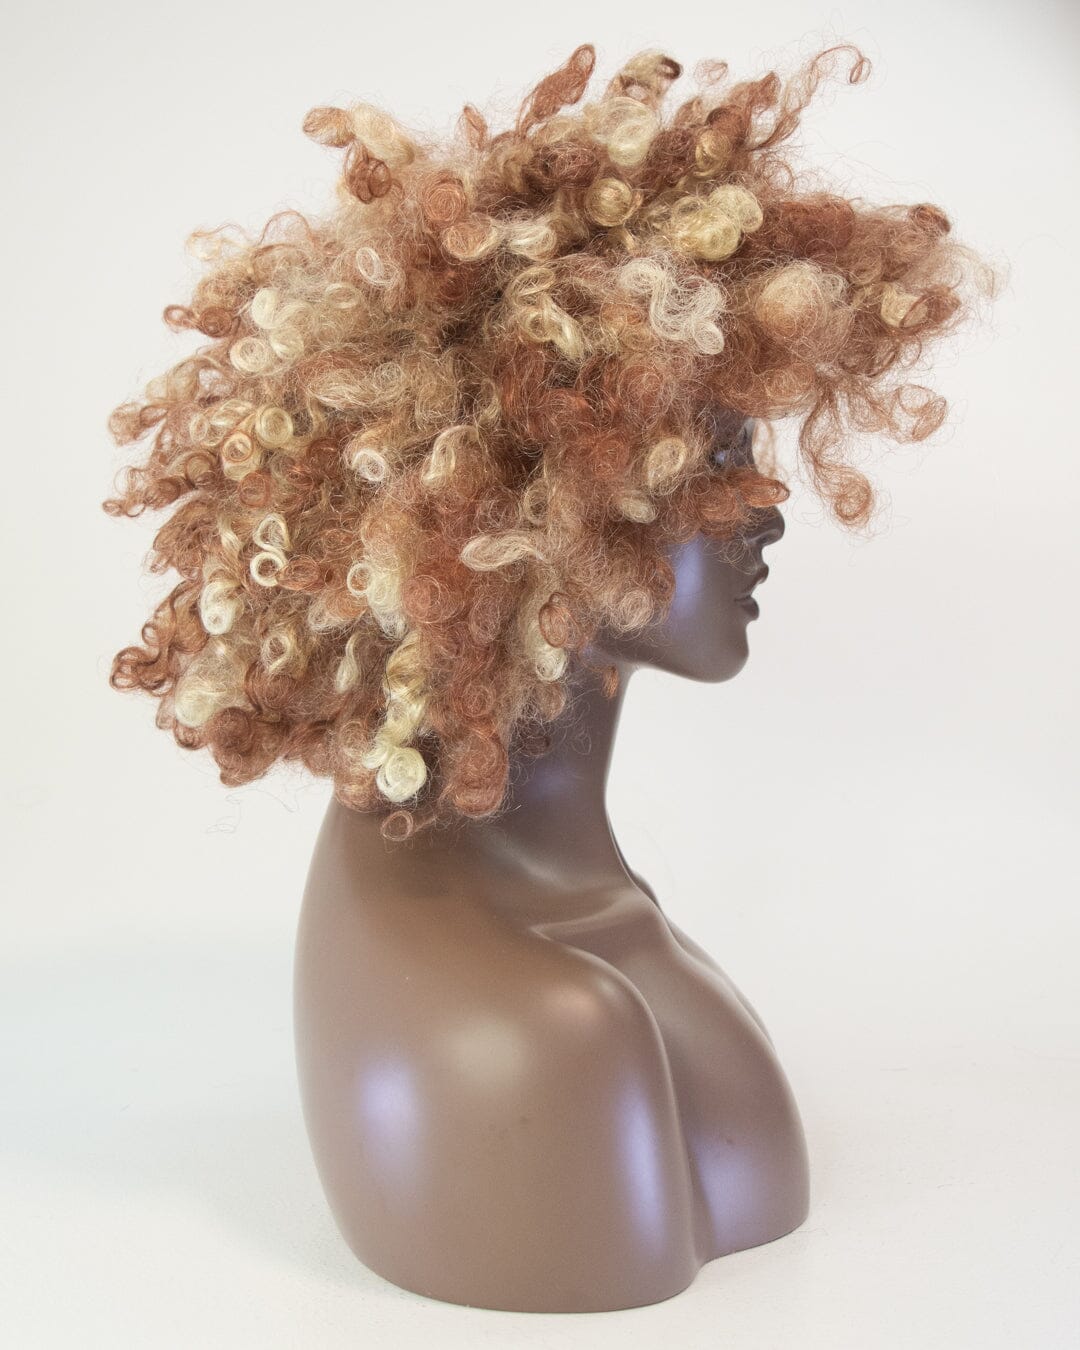 Auburn And Blonde Synthetic Hair Afro Wig